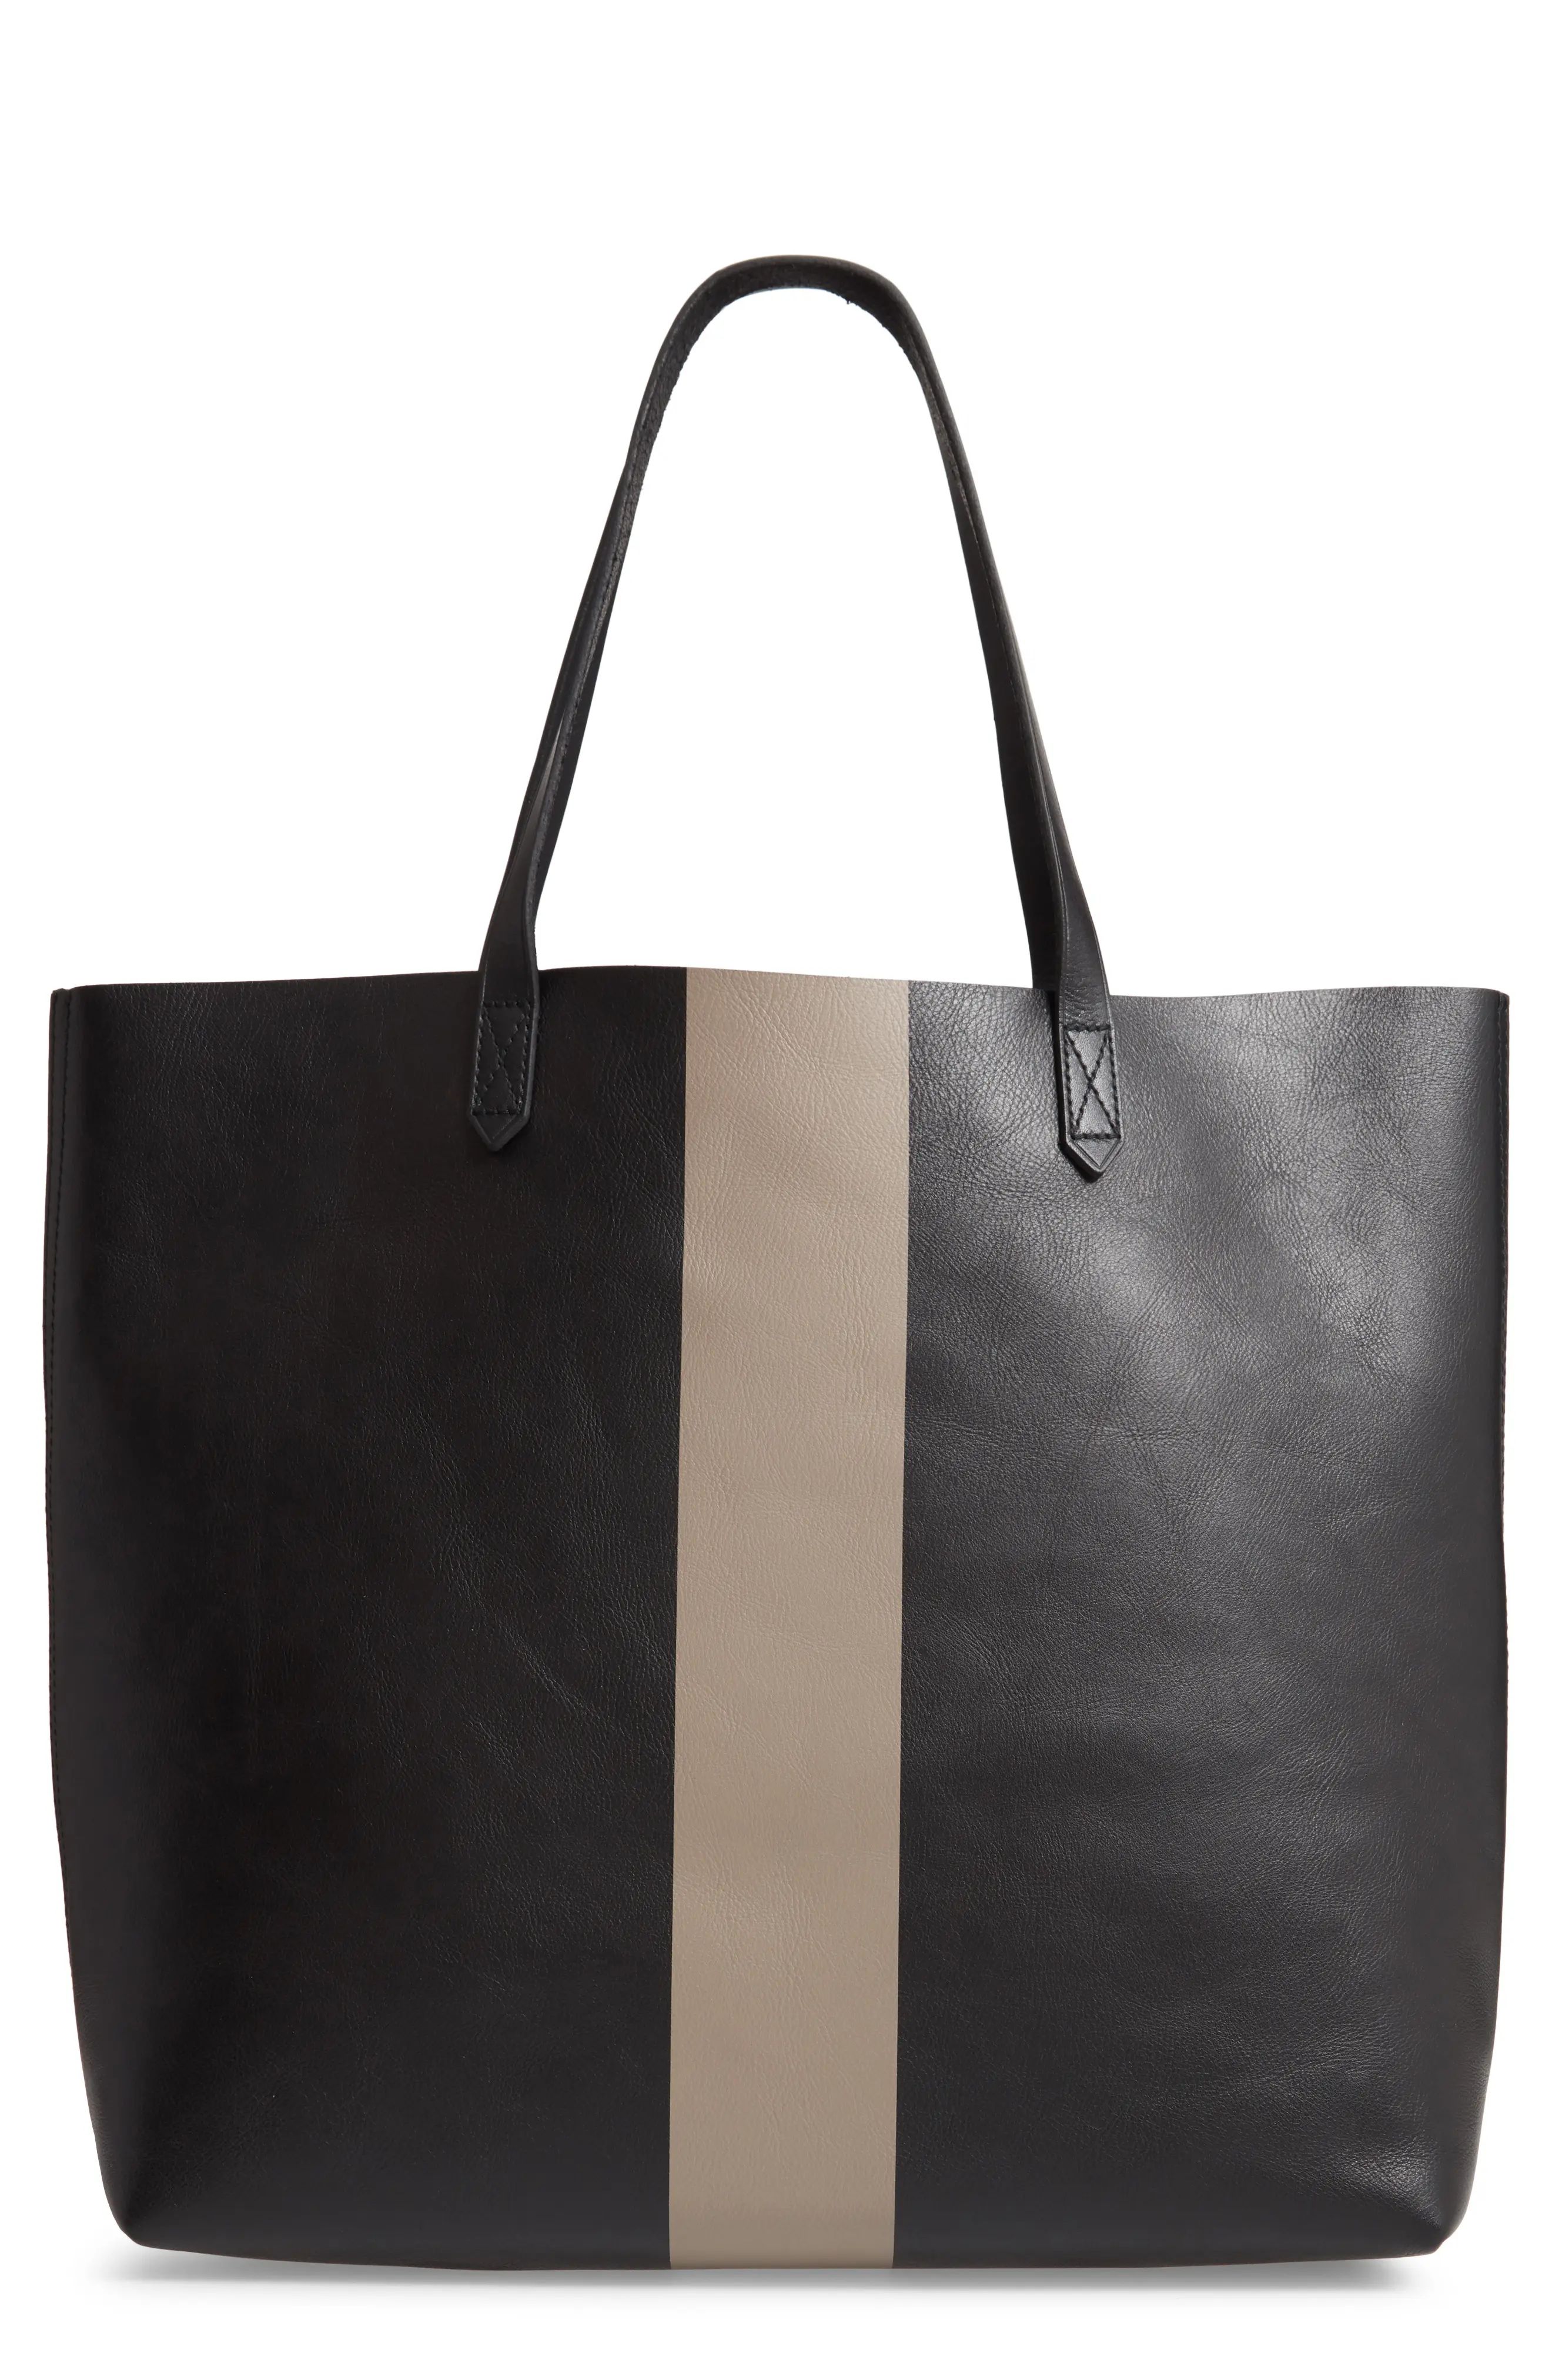 Madewell Paint Stripe Transport Leather Tote | Nordstrom